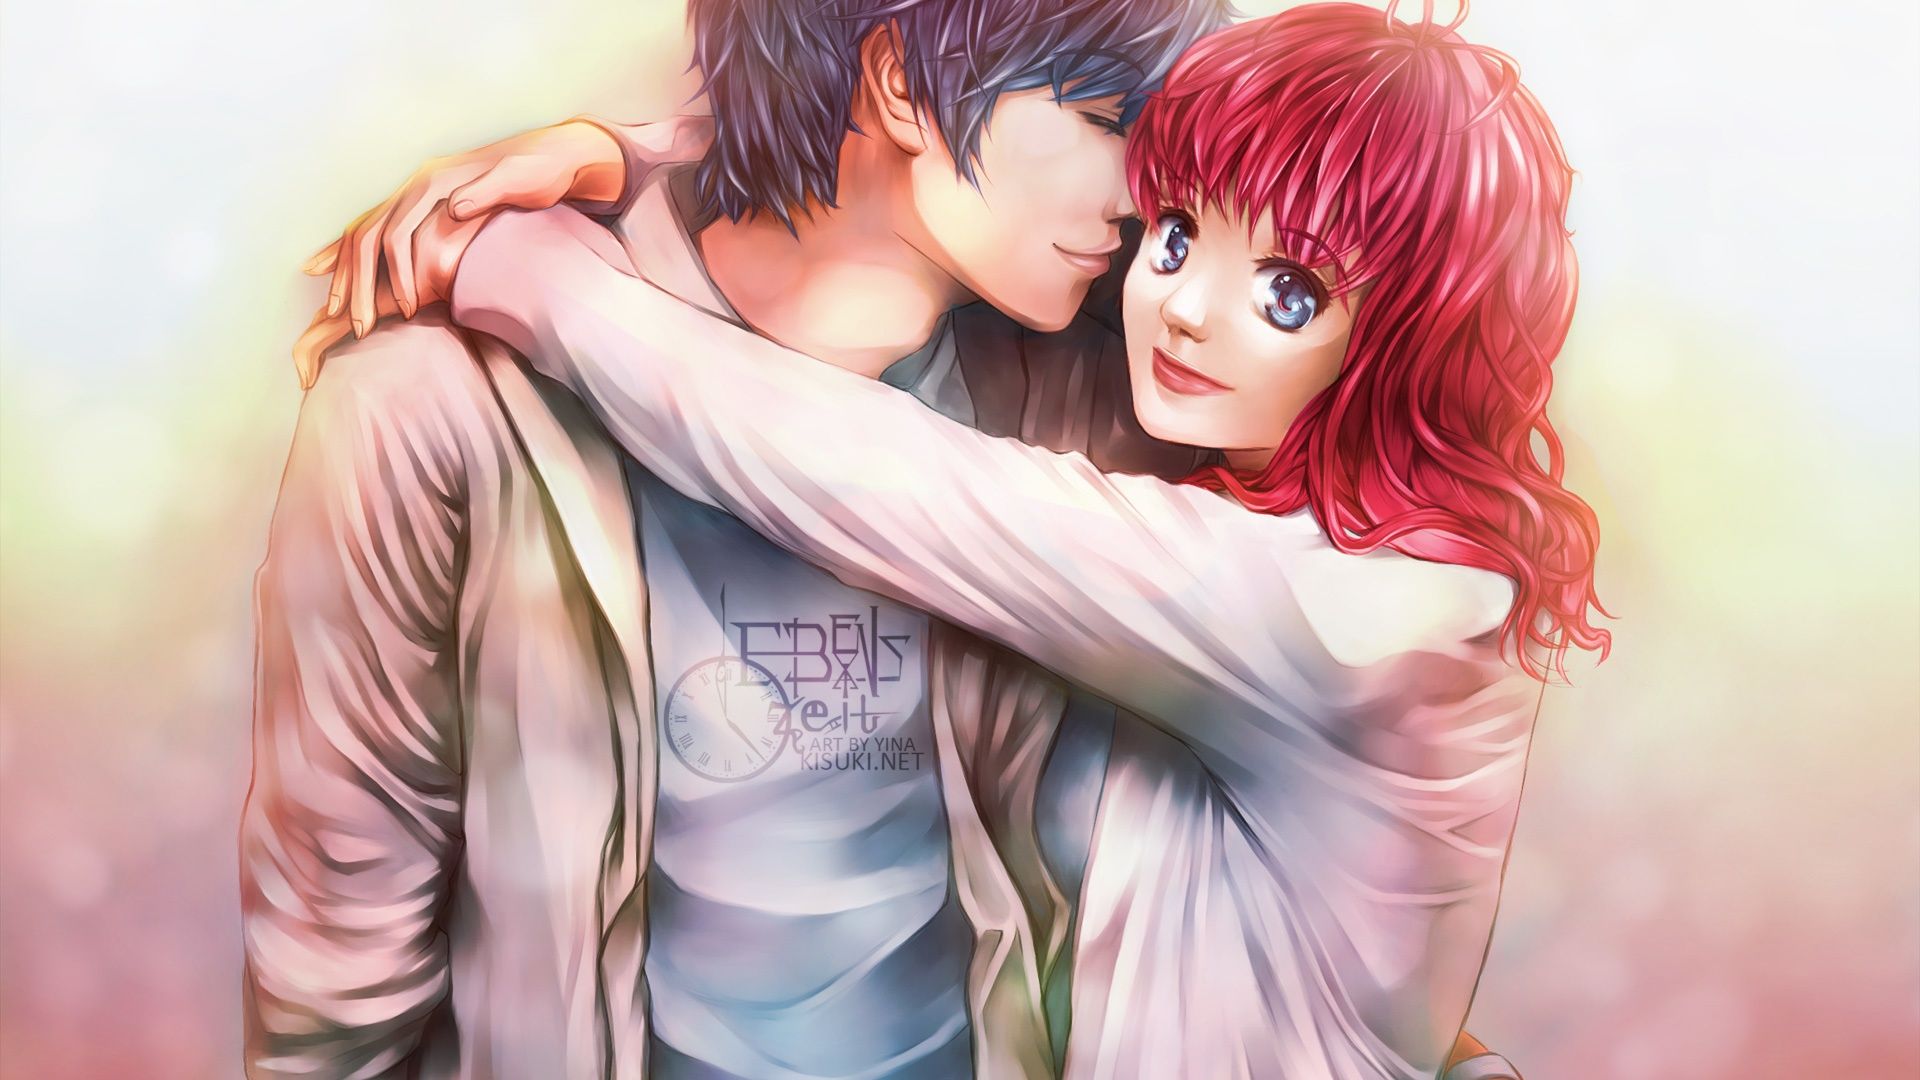 Wallpaper Anime boy and girl, lover 1920x1080 Full HD 2K Picture